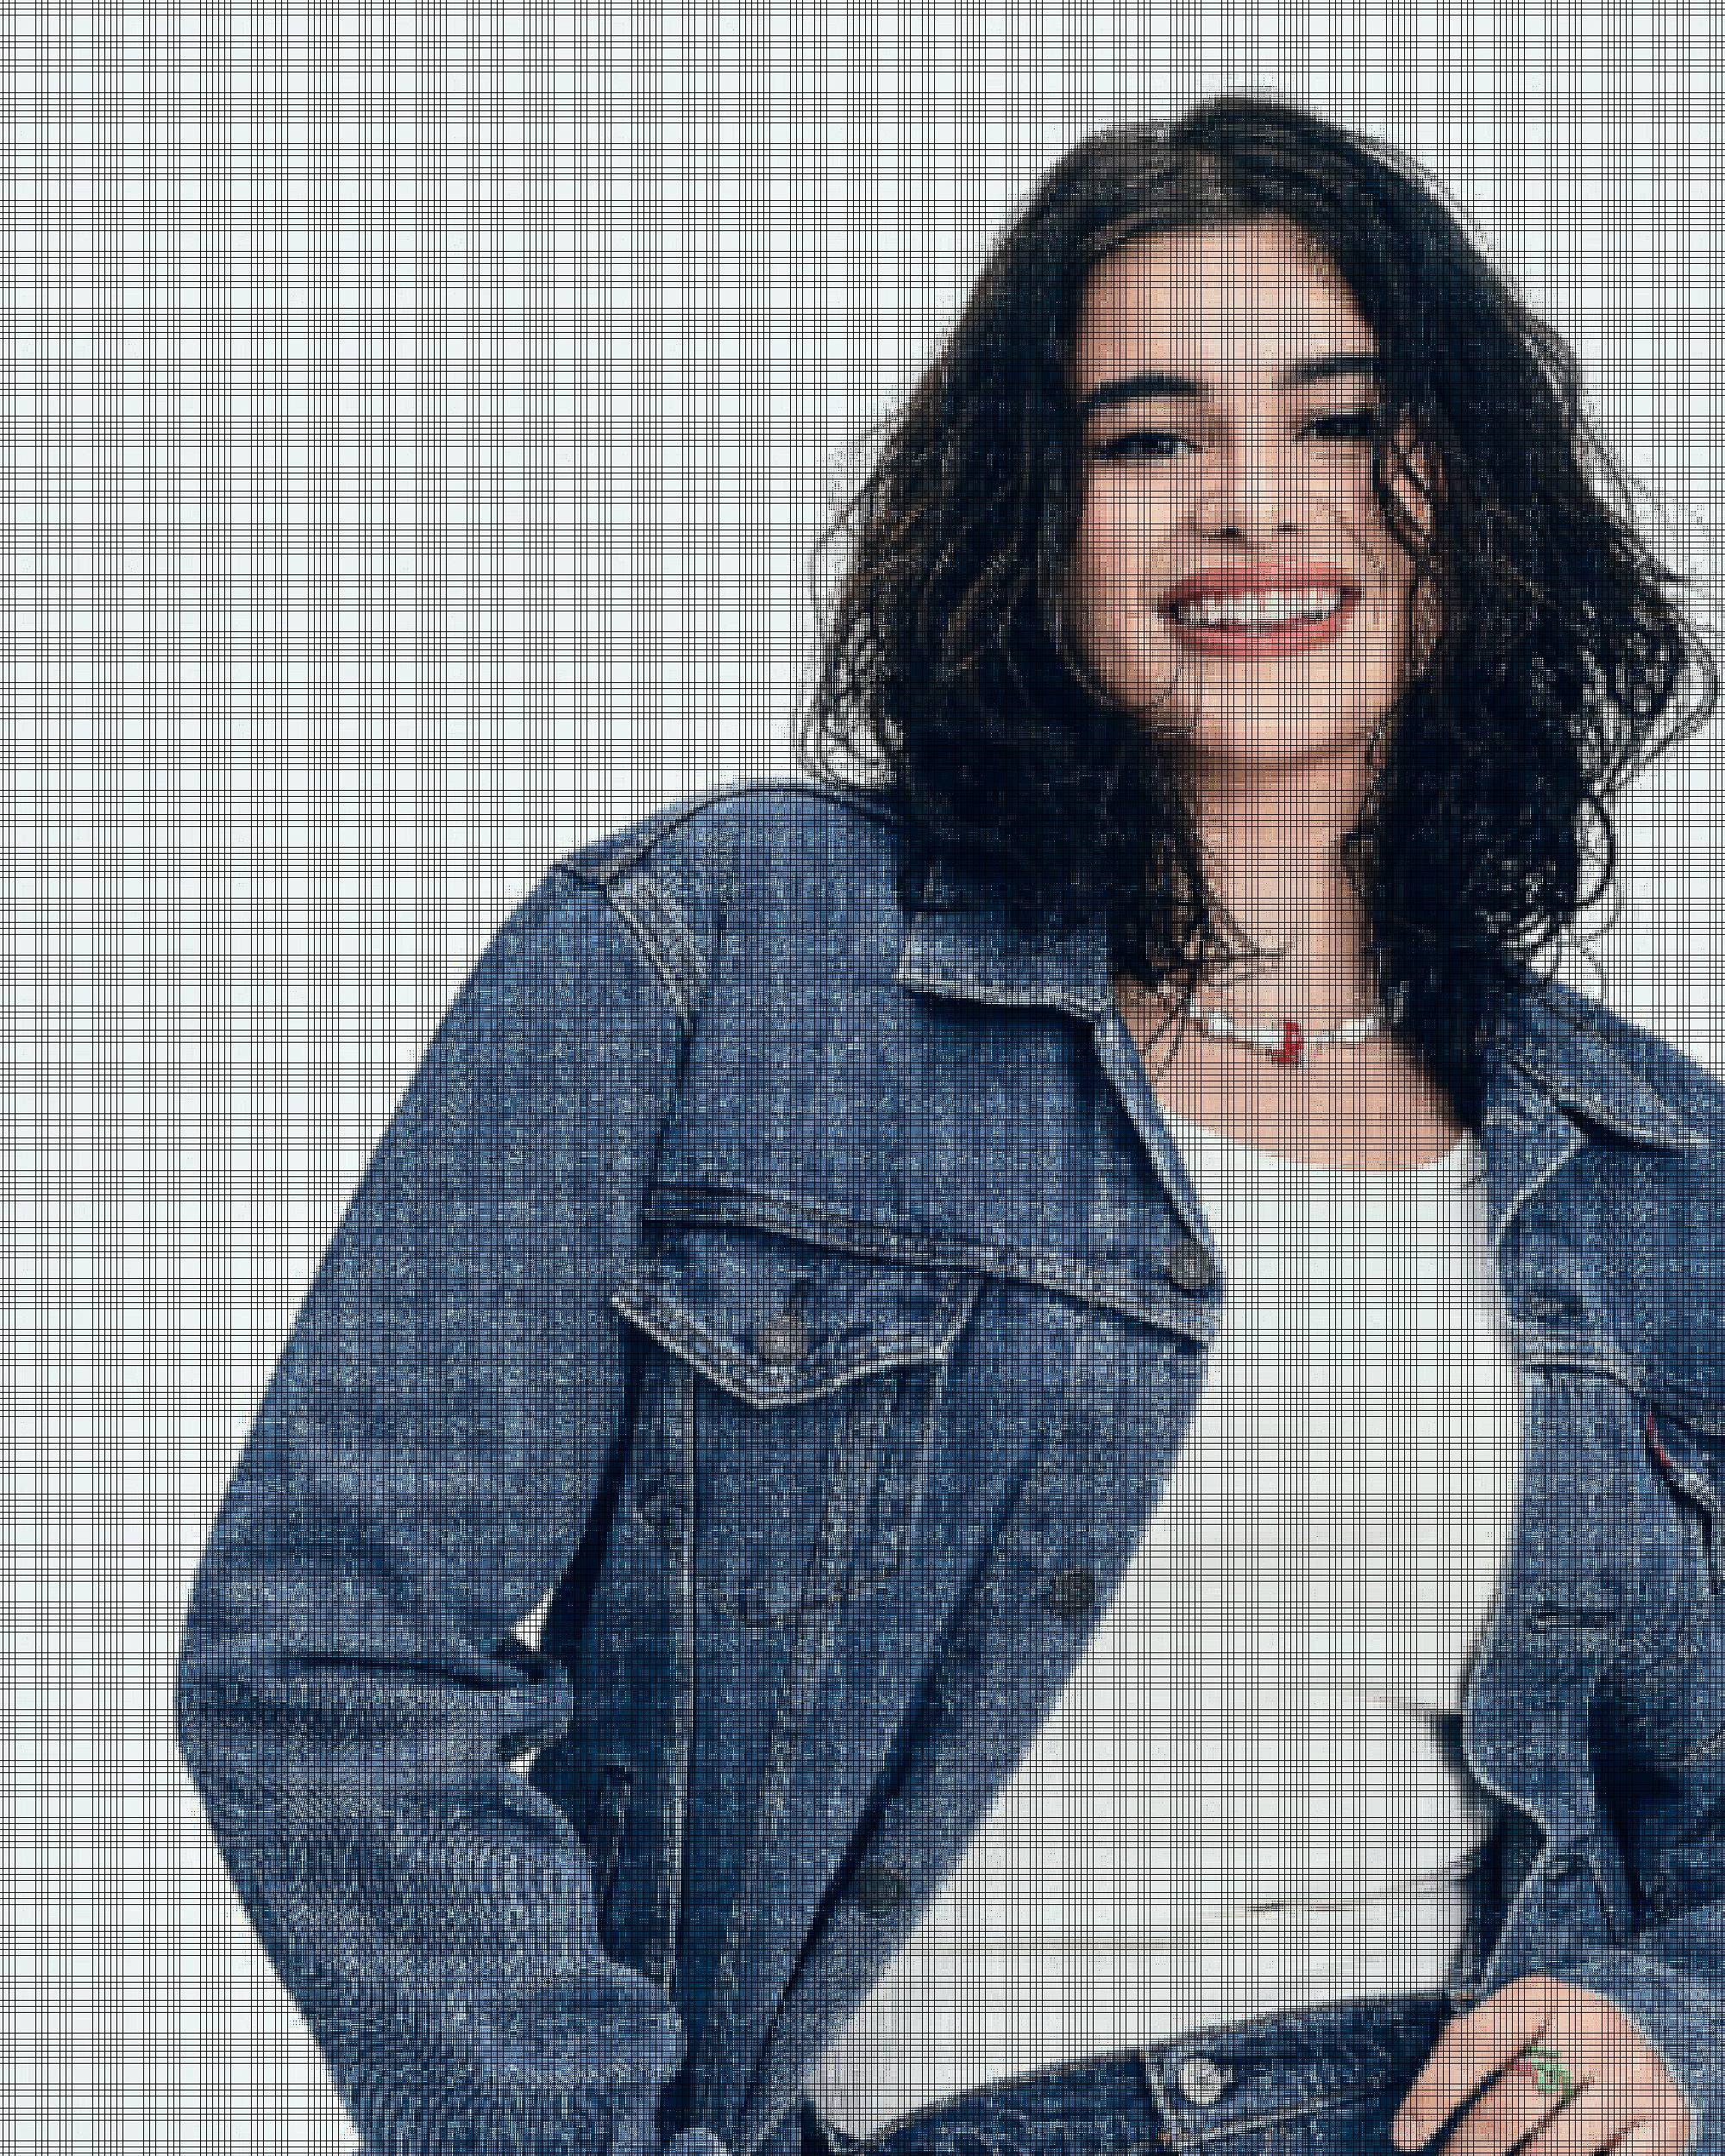 Three photos of Barbie Ferreira in a Levi's trucker jacket and jeans